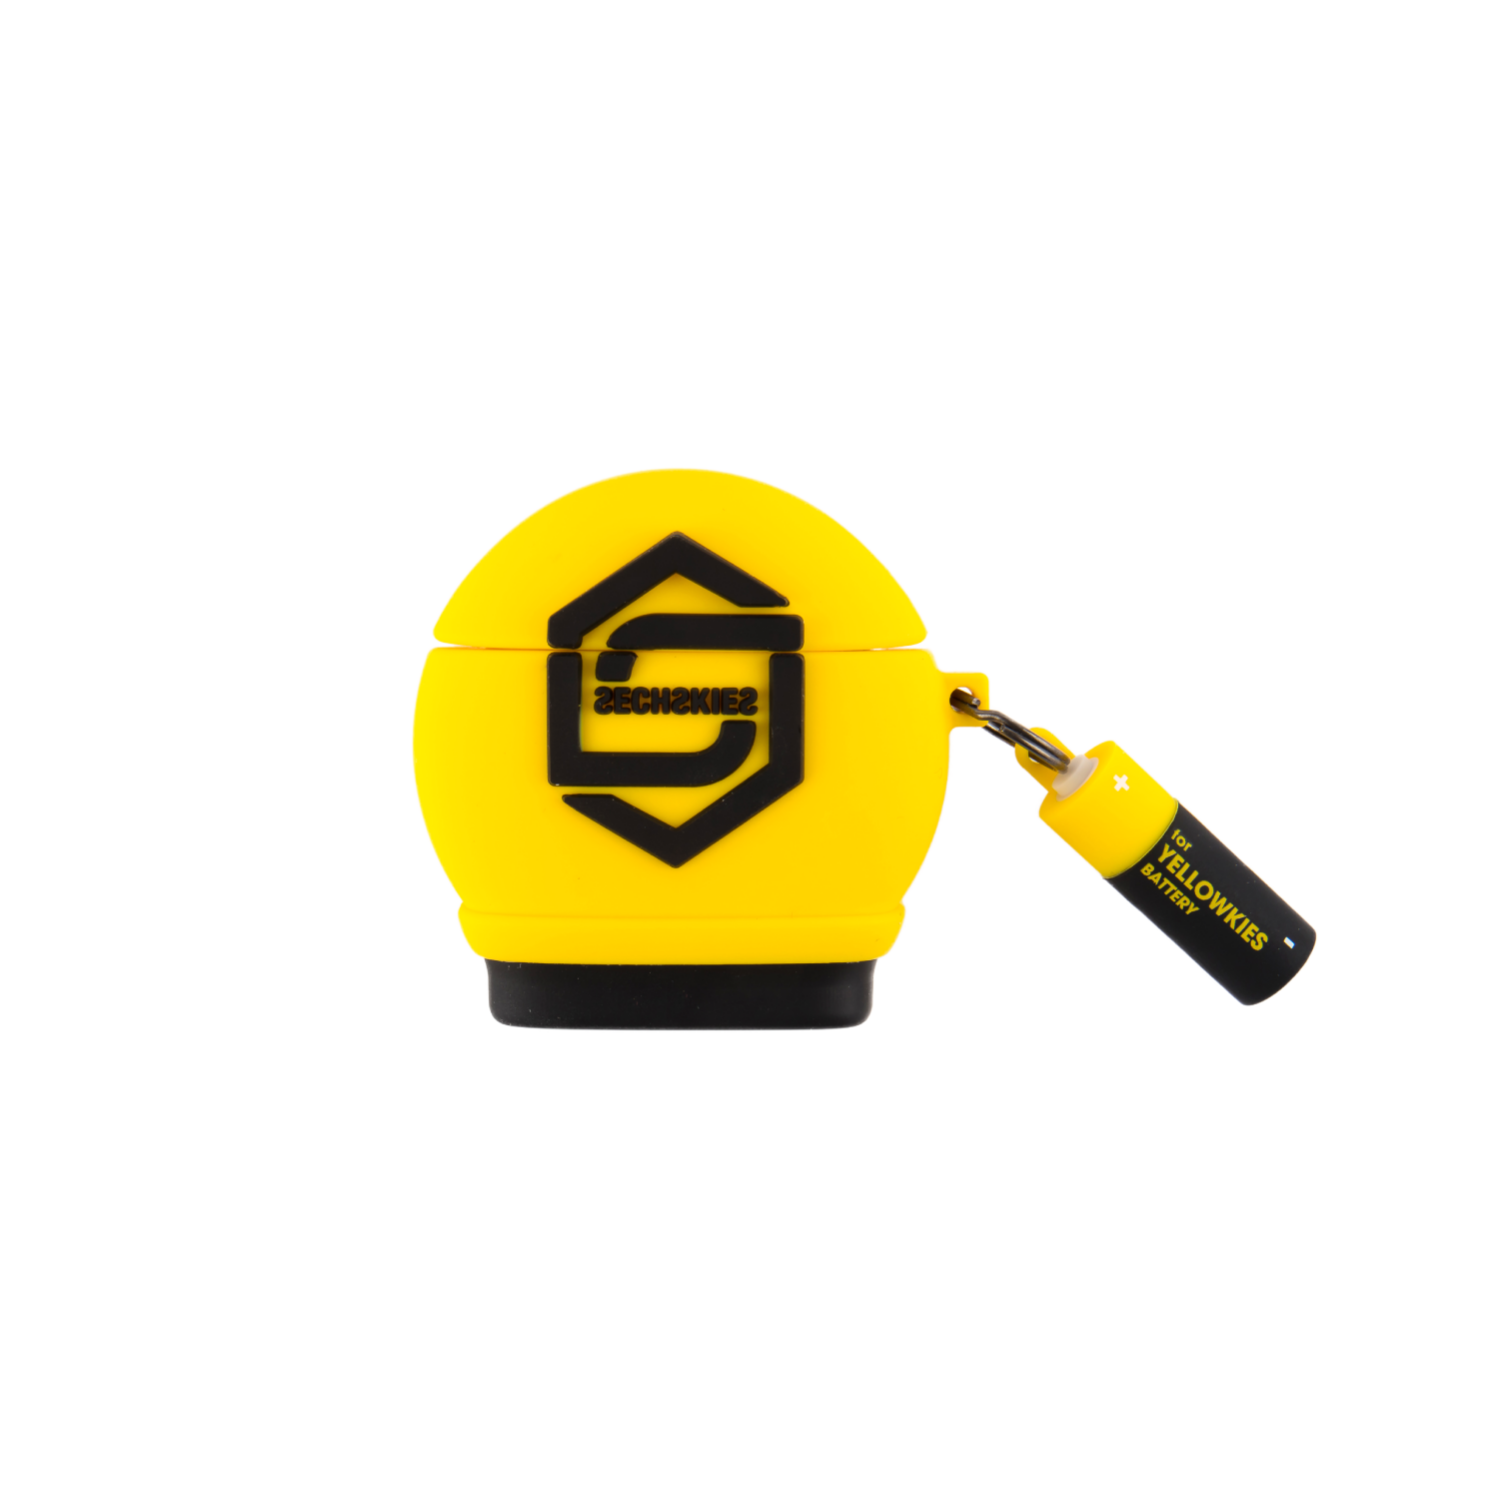 SECHSKIES AIRPODS SILICONE CASE SET